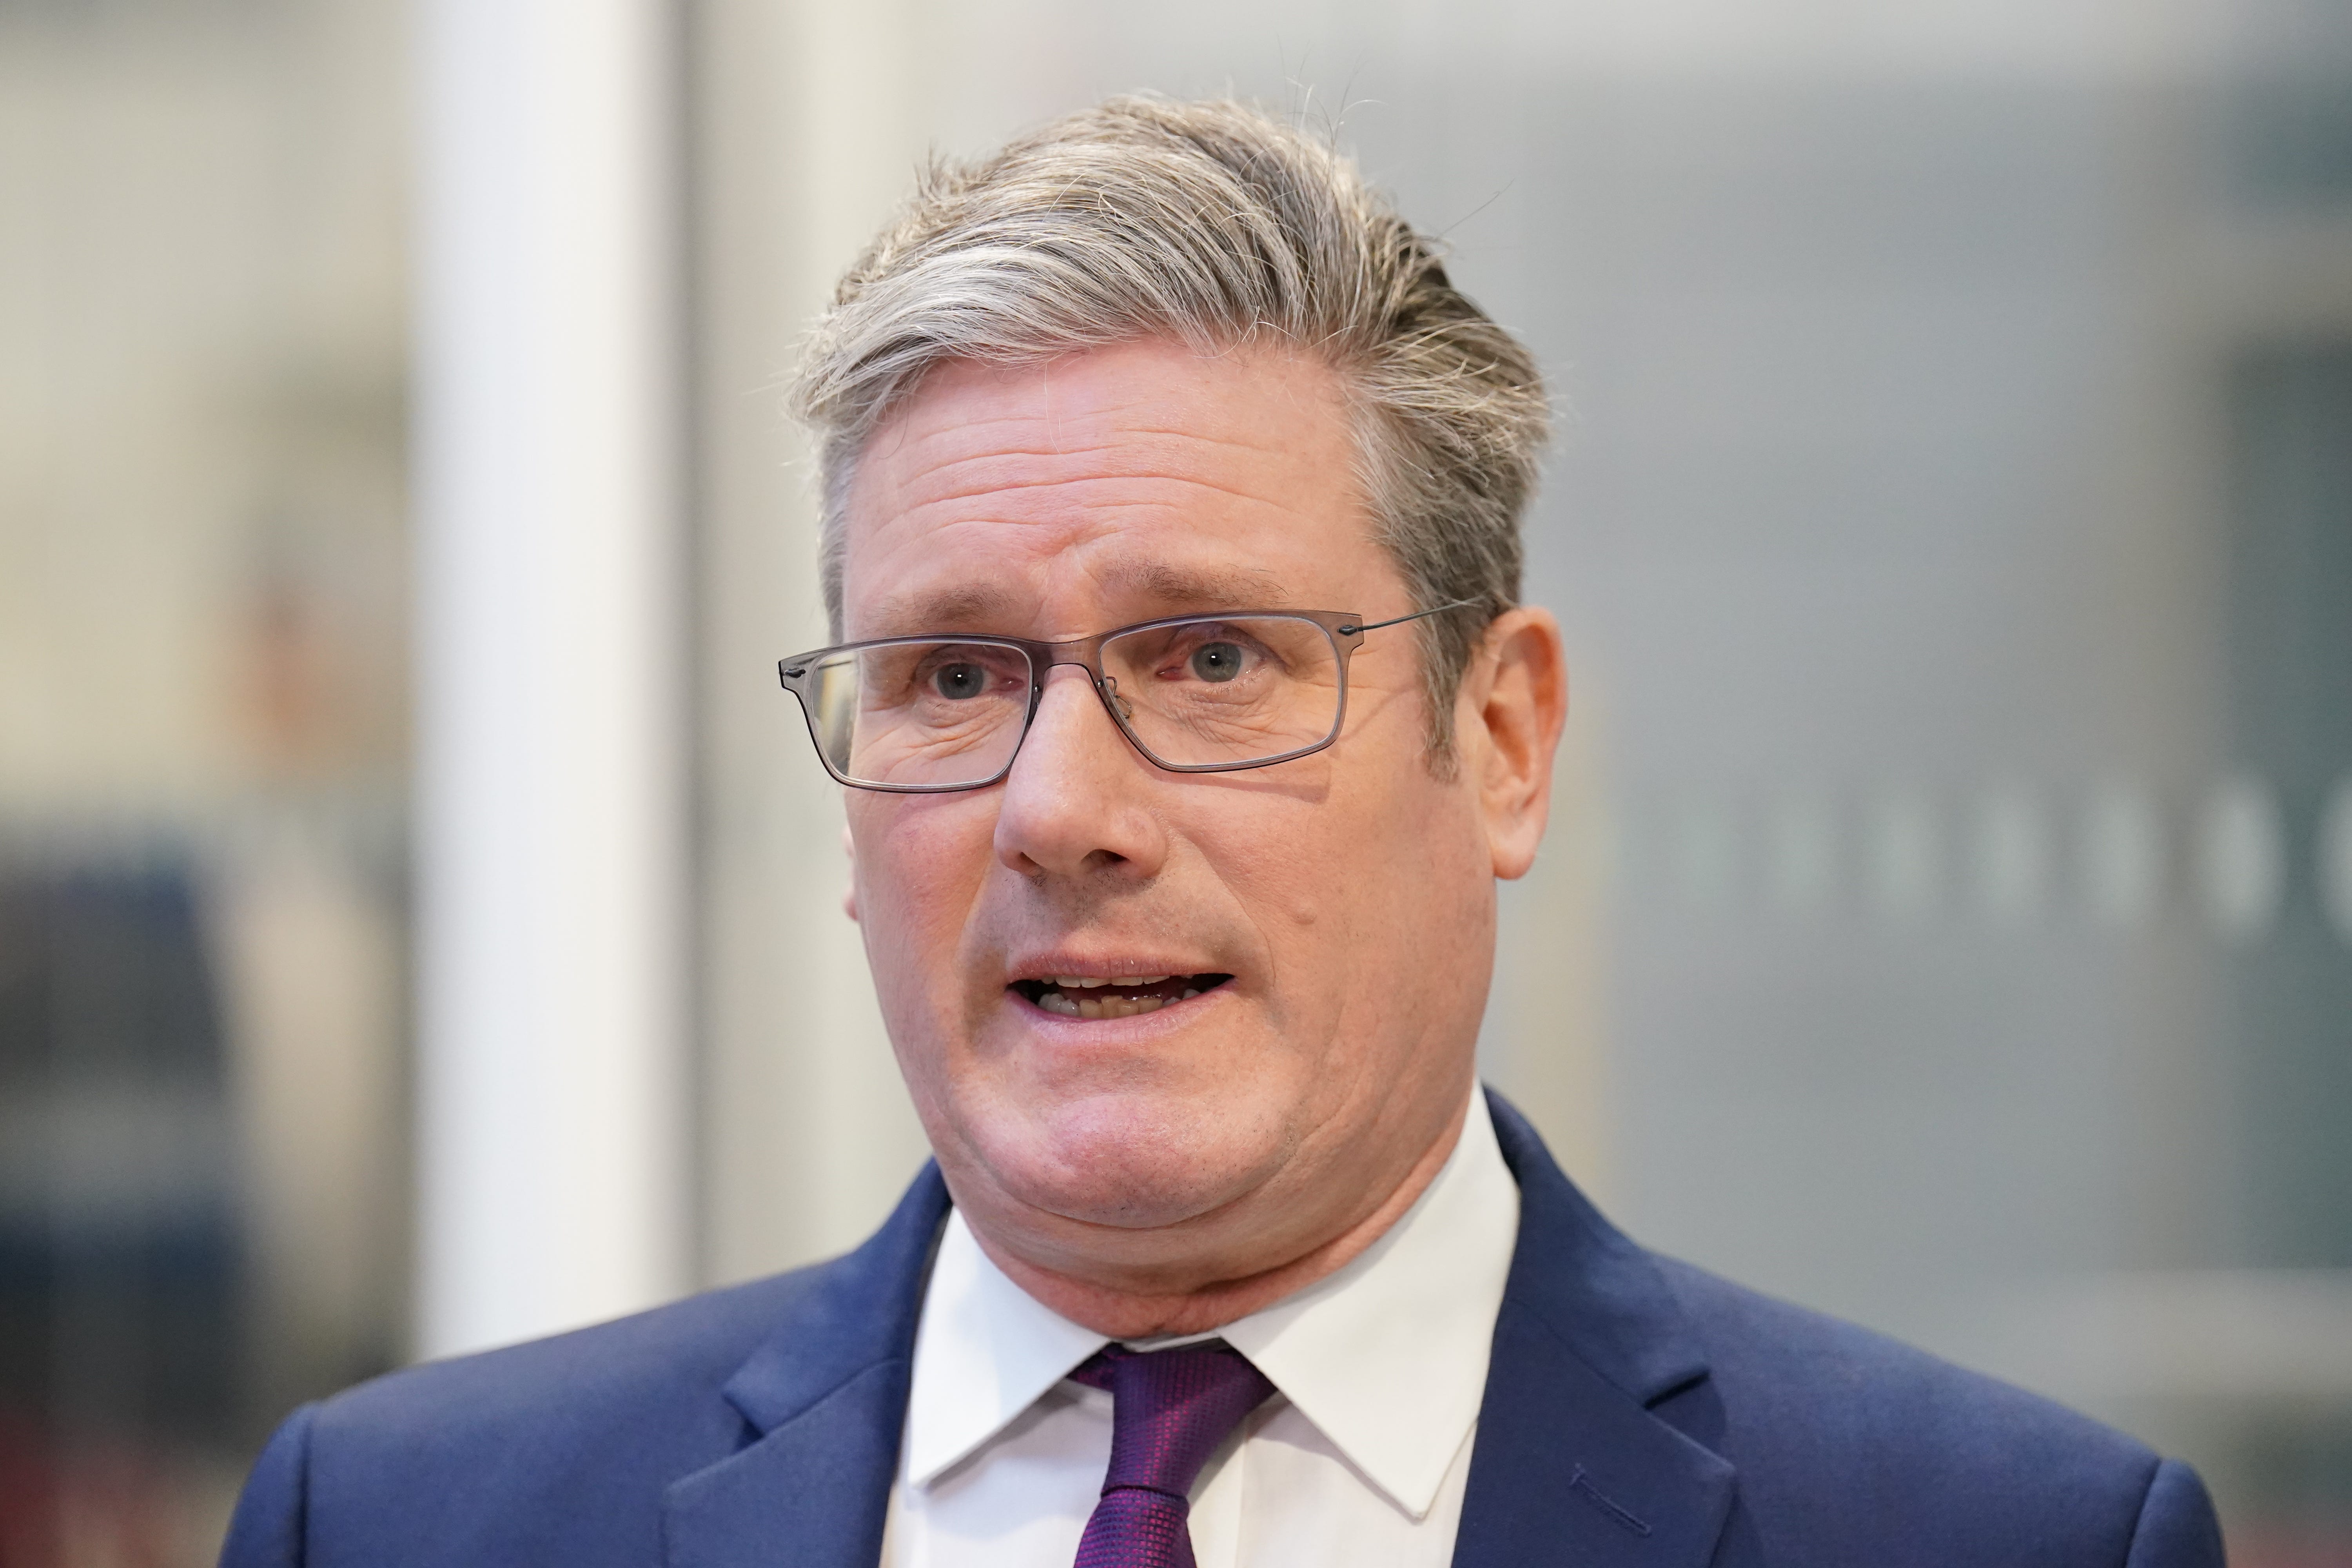 Sir Keir Starmer was criticised by a senior member of his shadow cabinet for “back-sliding” on rape case law.